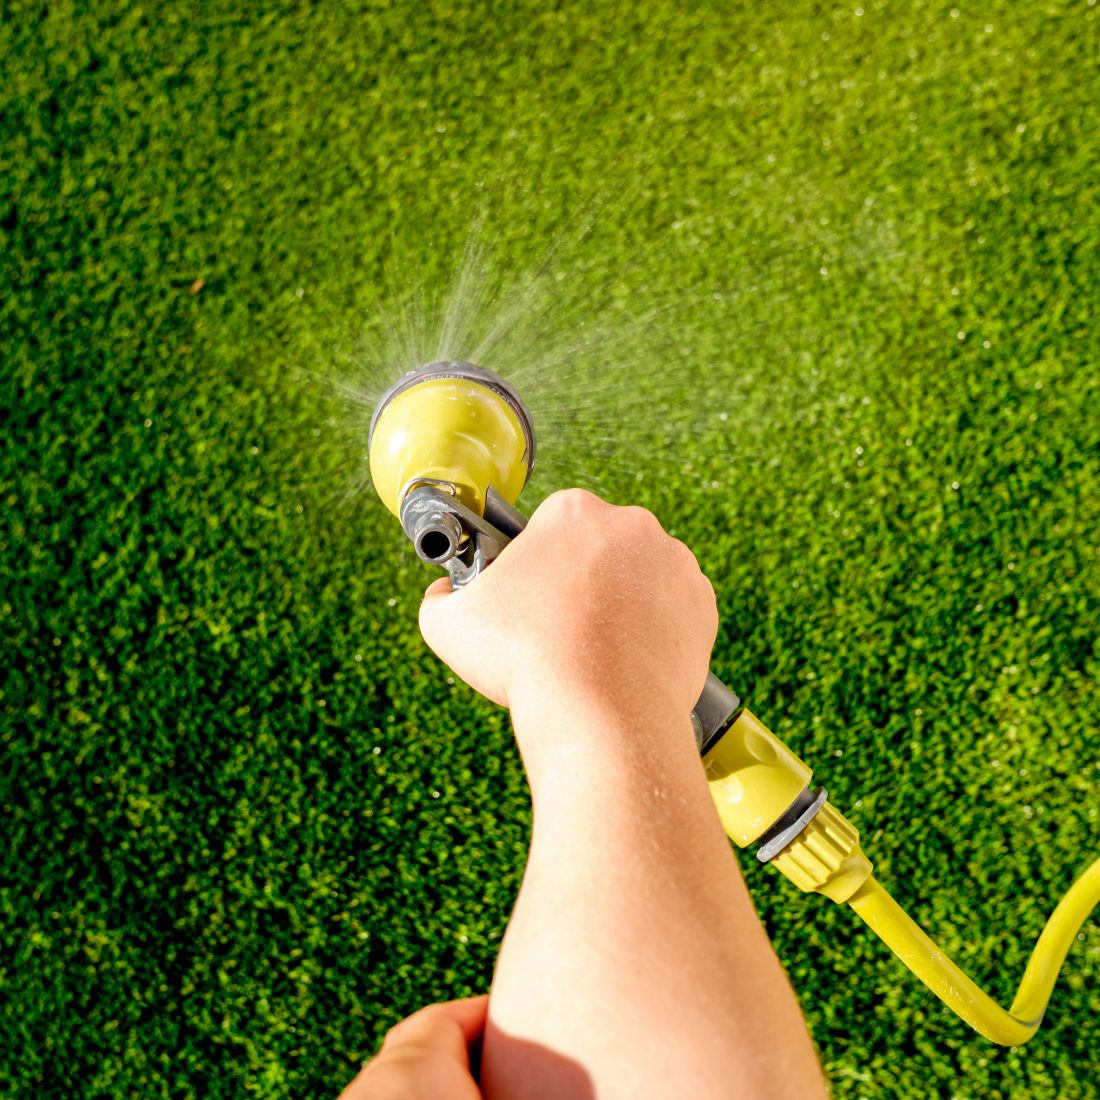 How To Clean Artificial Grass: Keep Your Grass Beautiful All Year